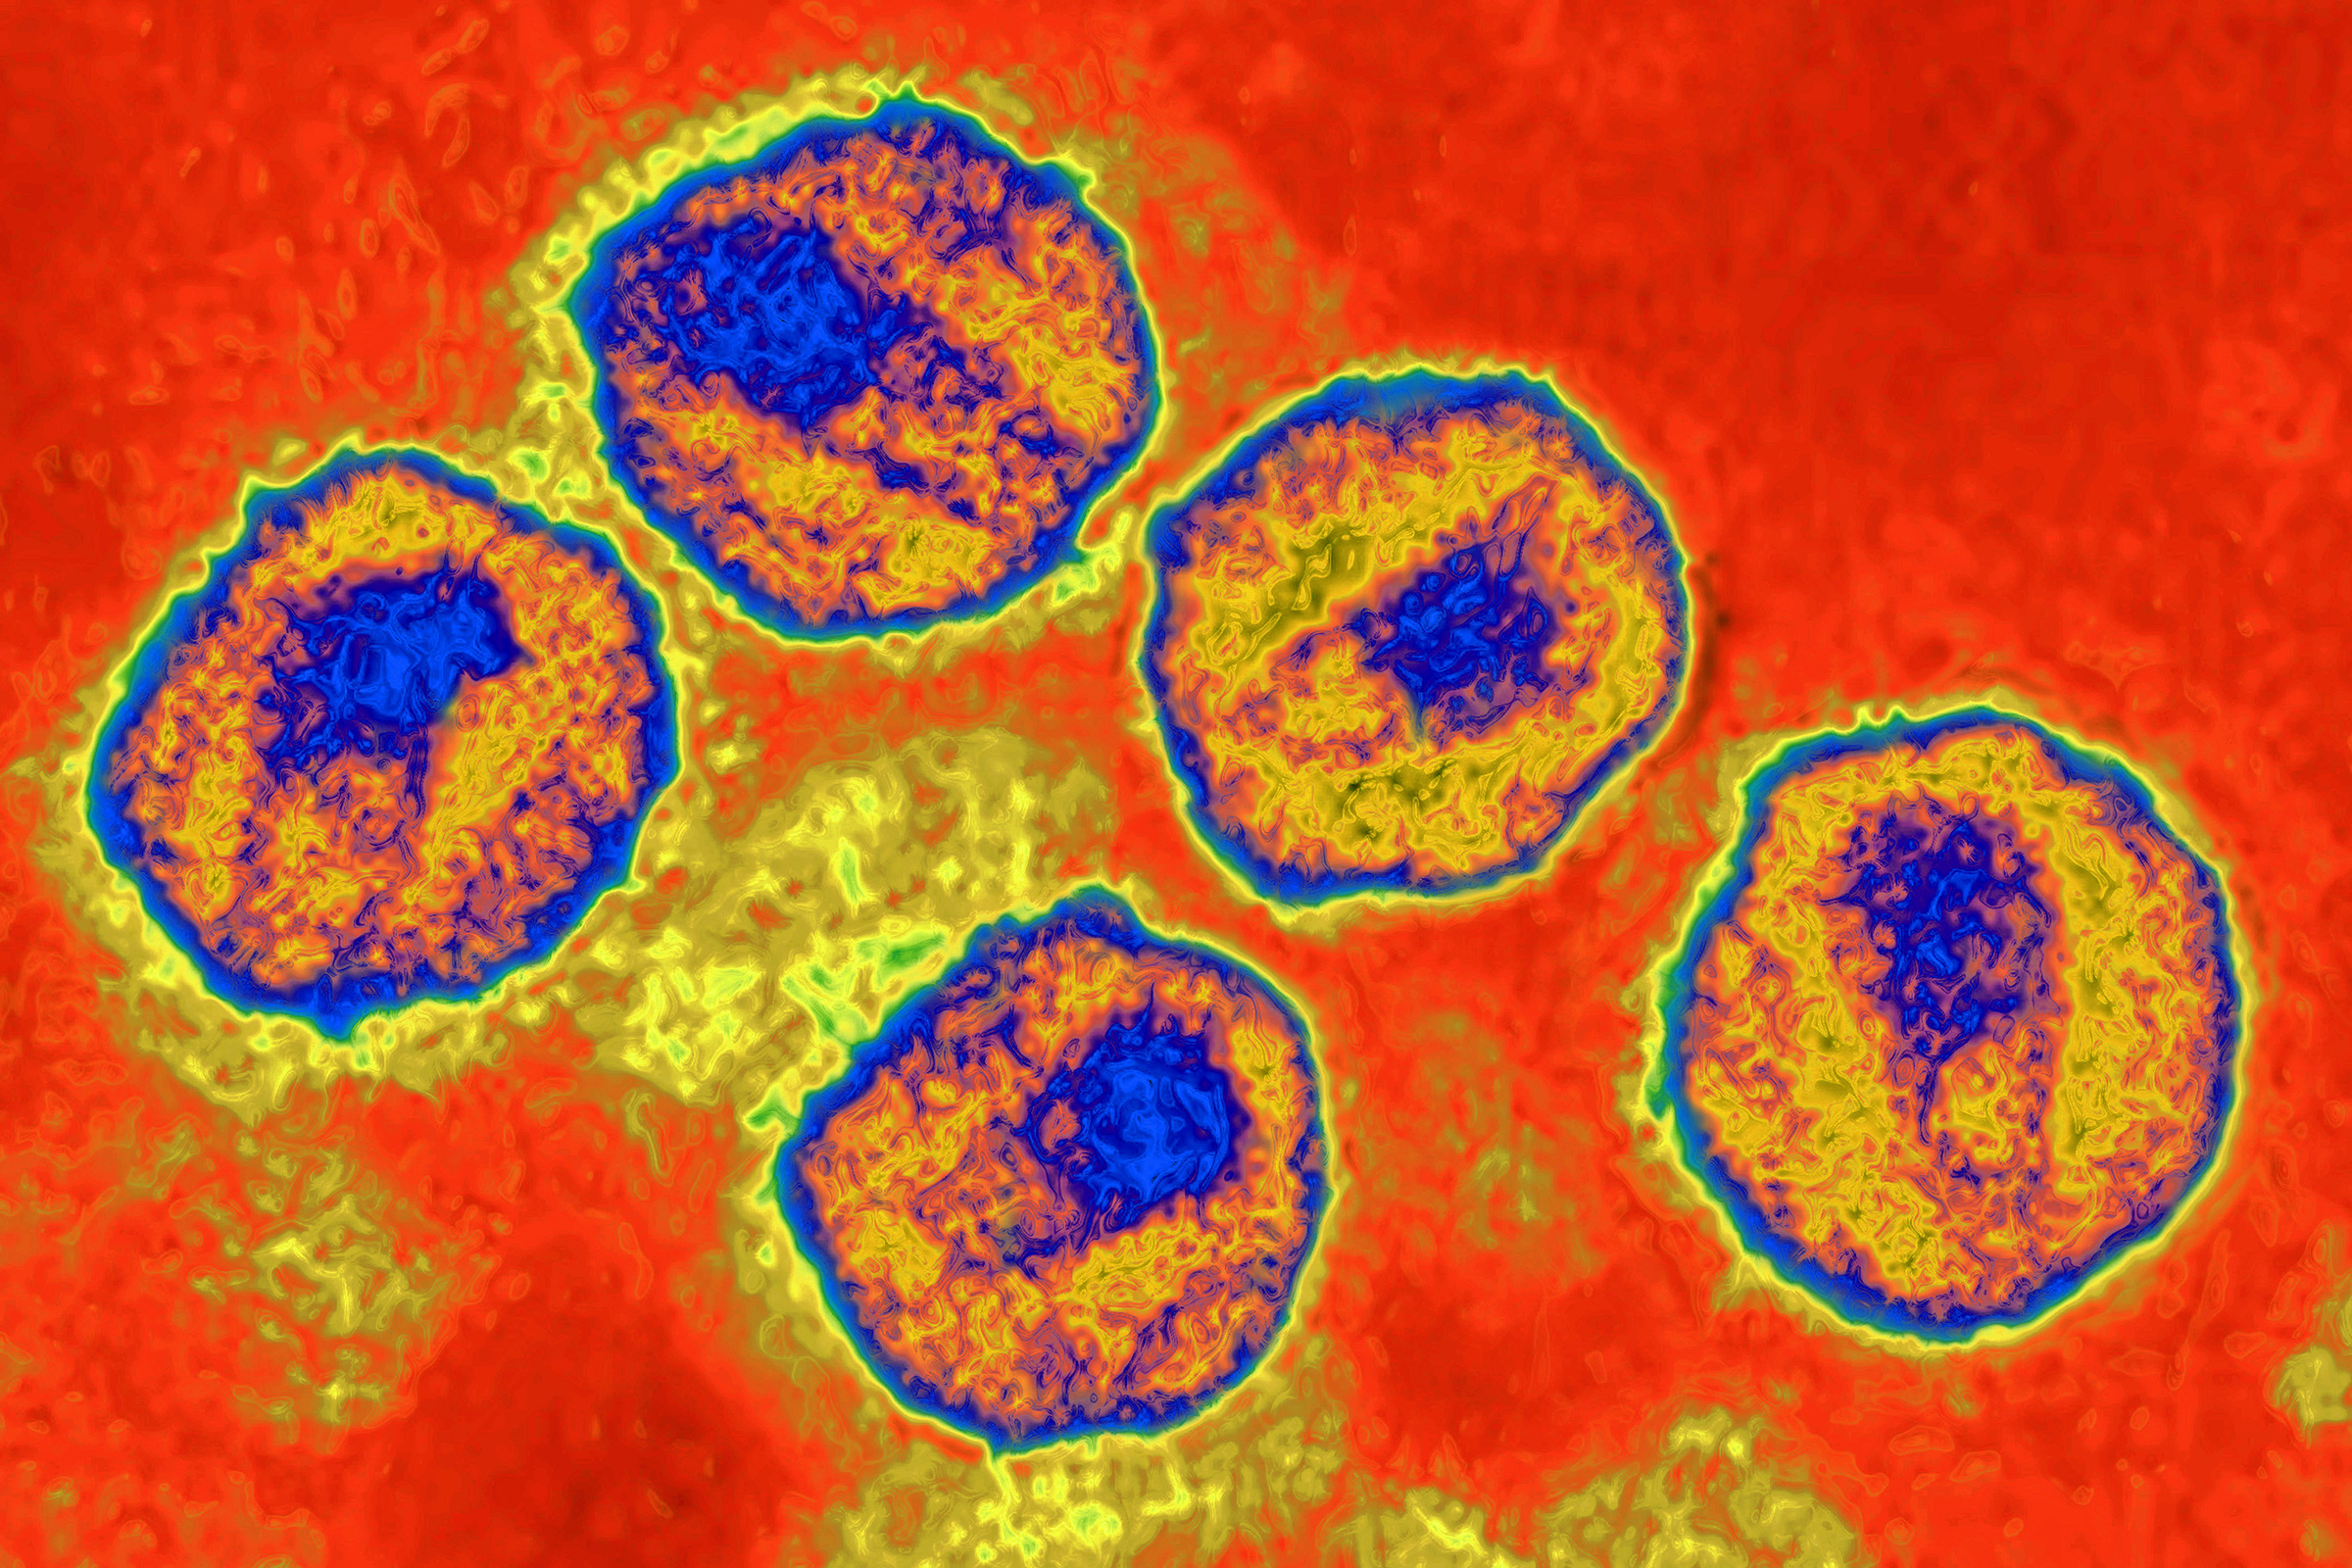 HIV virus. Image produced from an image taken with transmission electron microscopy. Viral diameter around 110 to 125 nm. (BSIP/Universal Images)